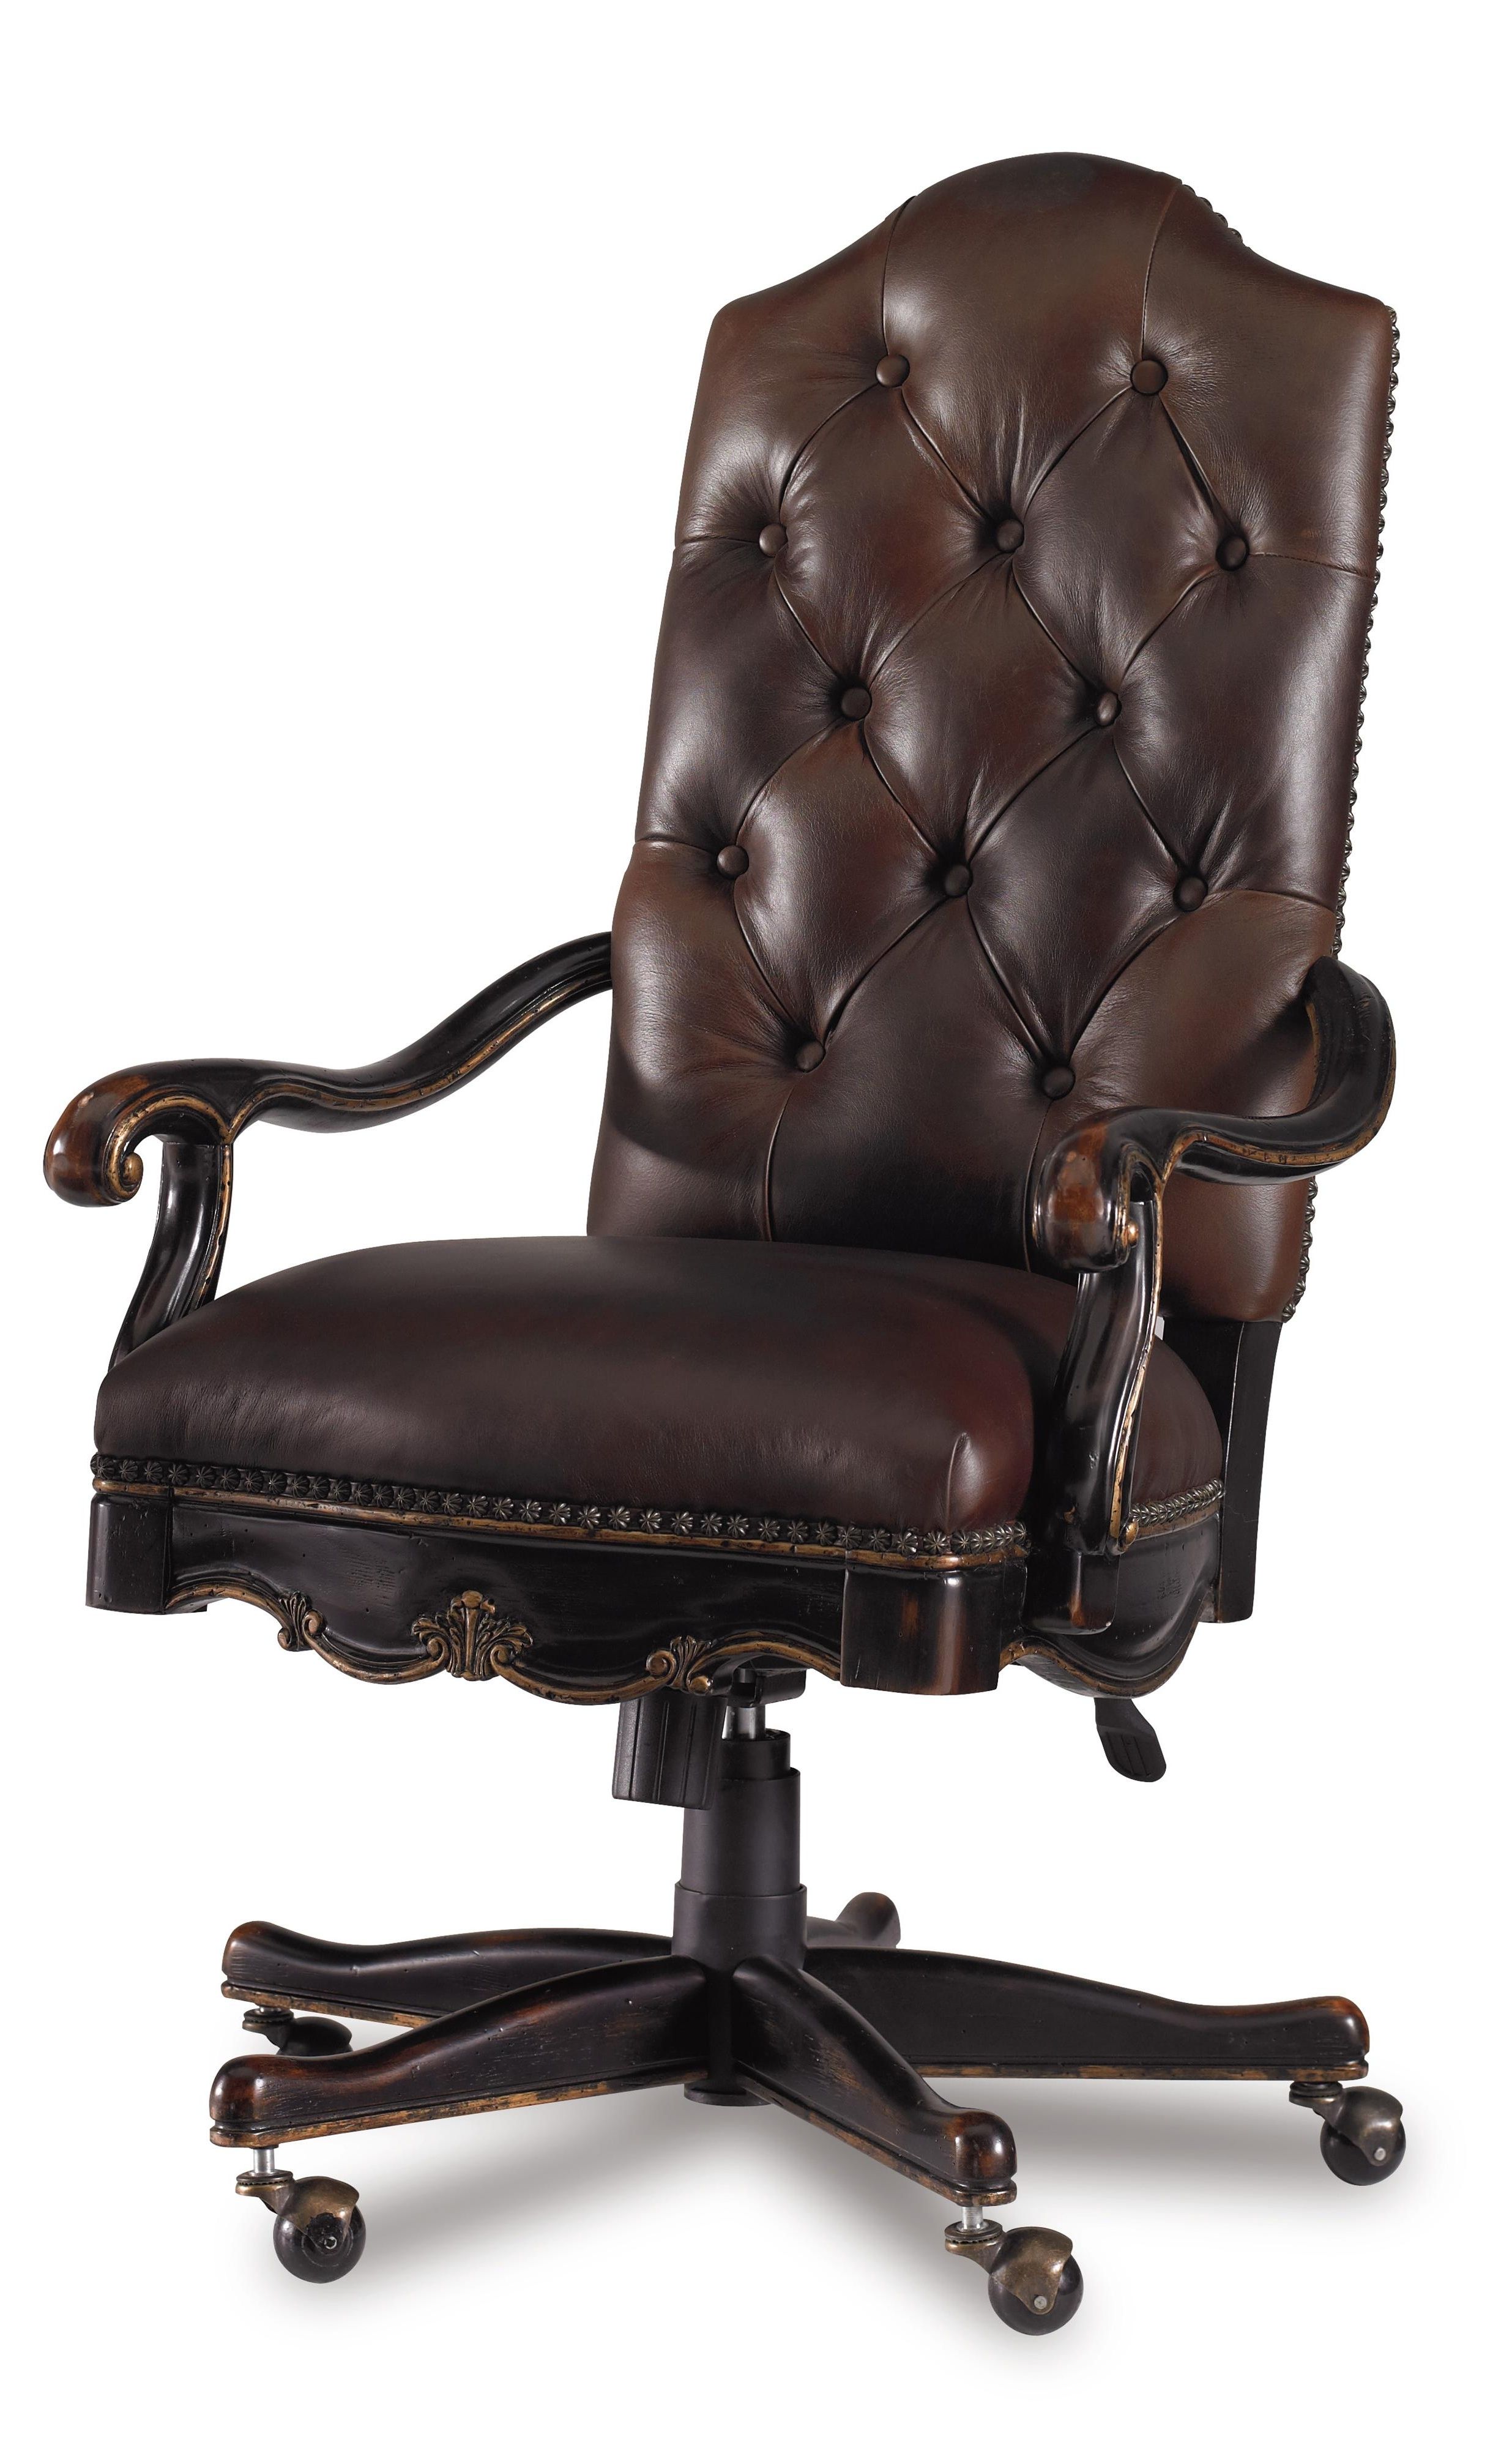 Fashionable Brown Leather Executive Office Chairs Regarding Hooker Furniture Grandover Tufted Leather Executive Office Chair (View 15 of 20)